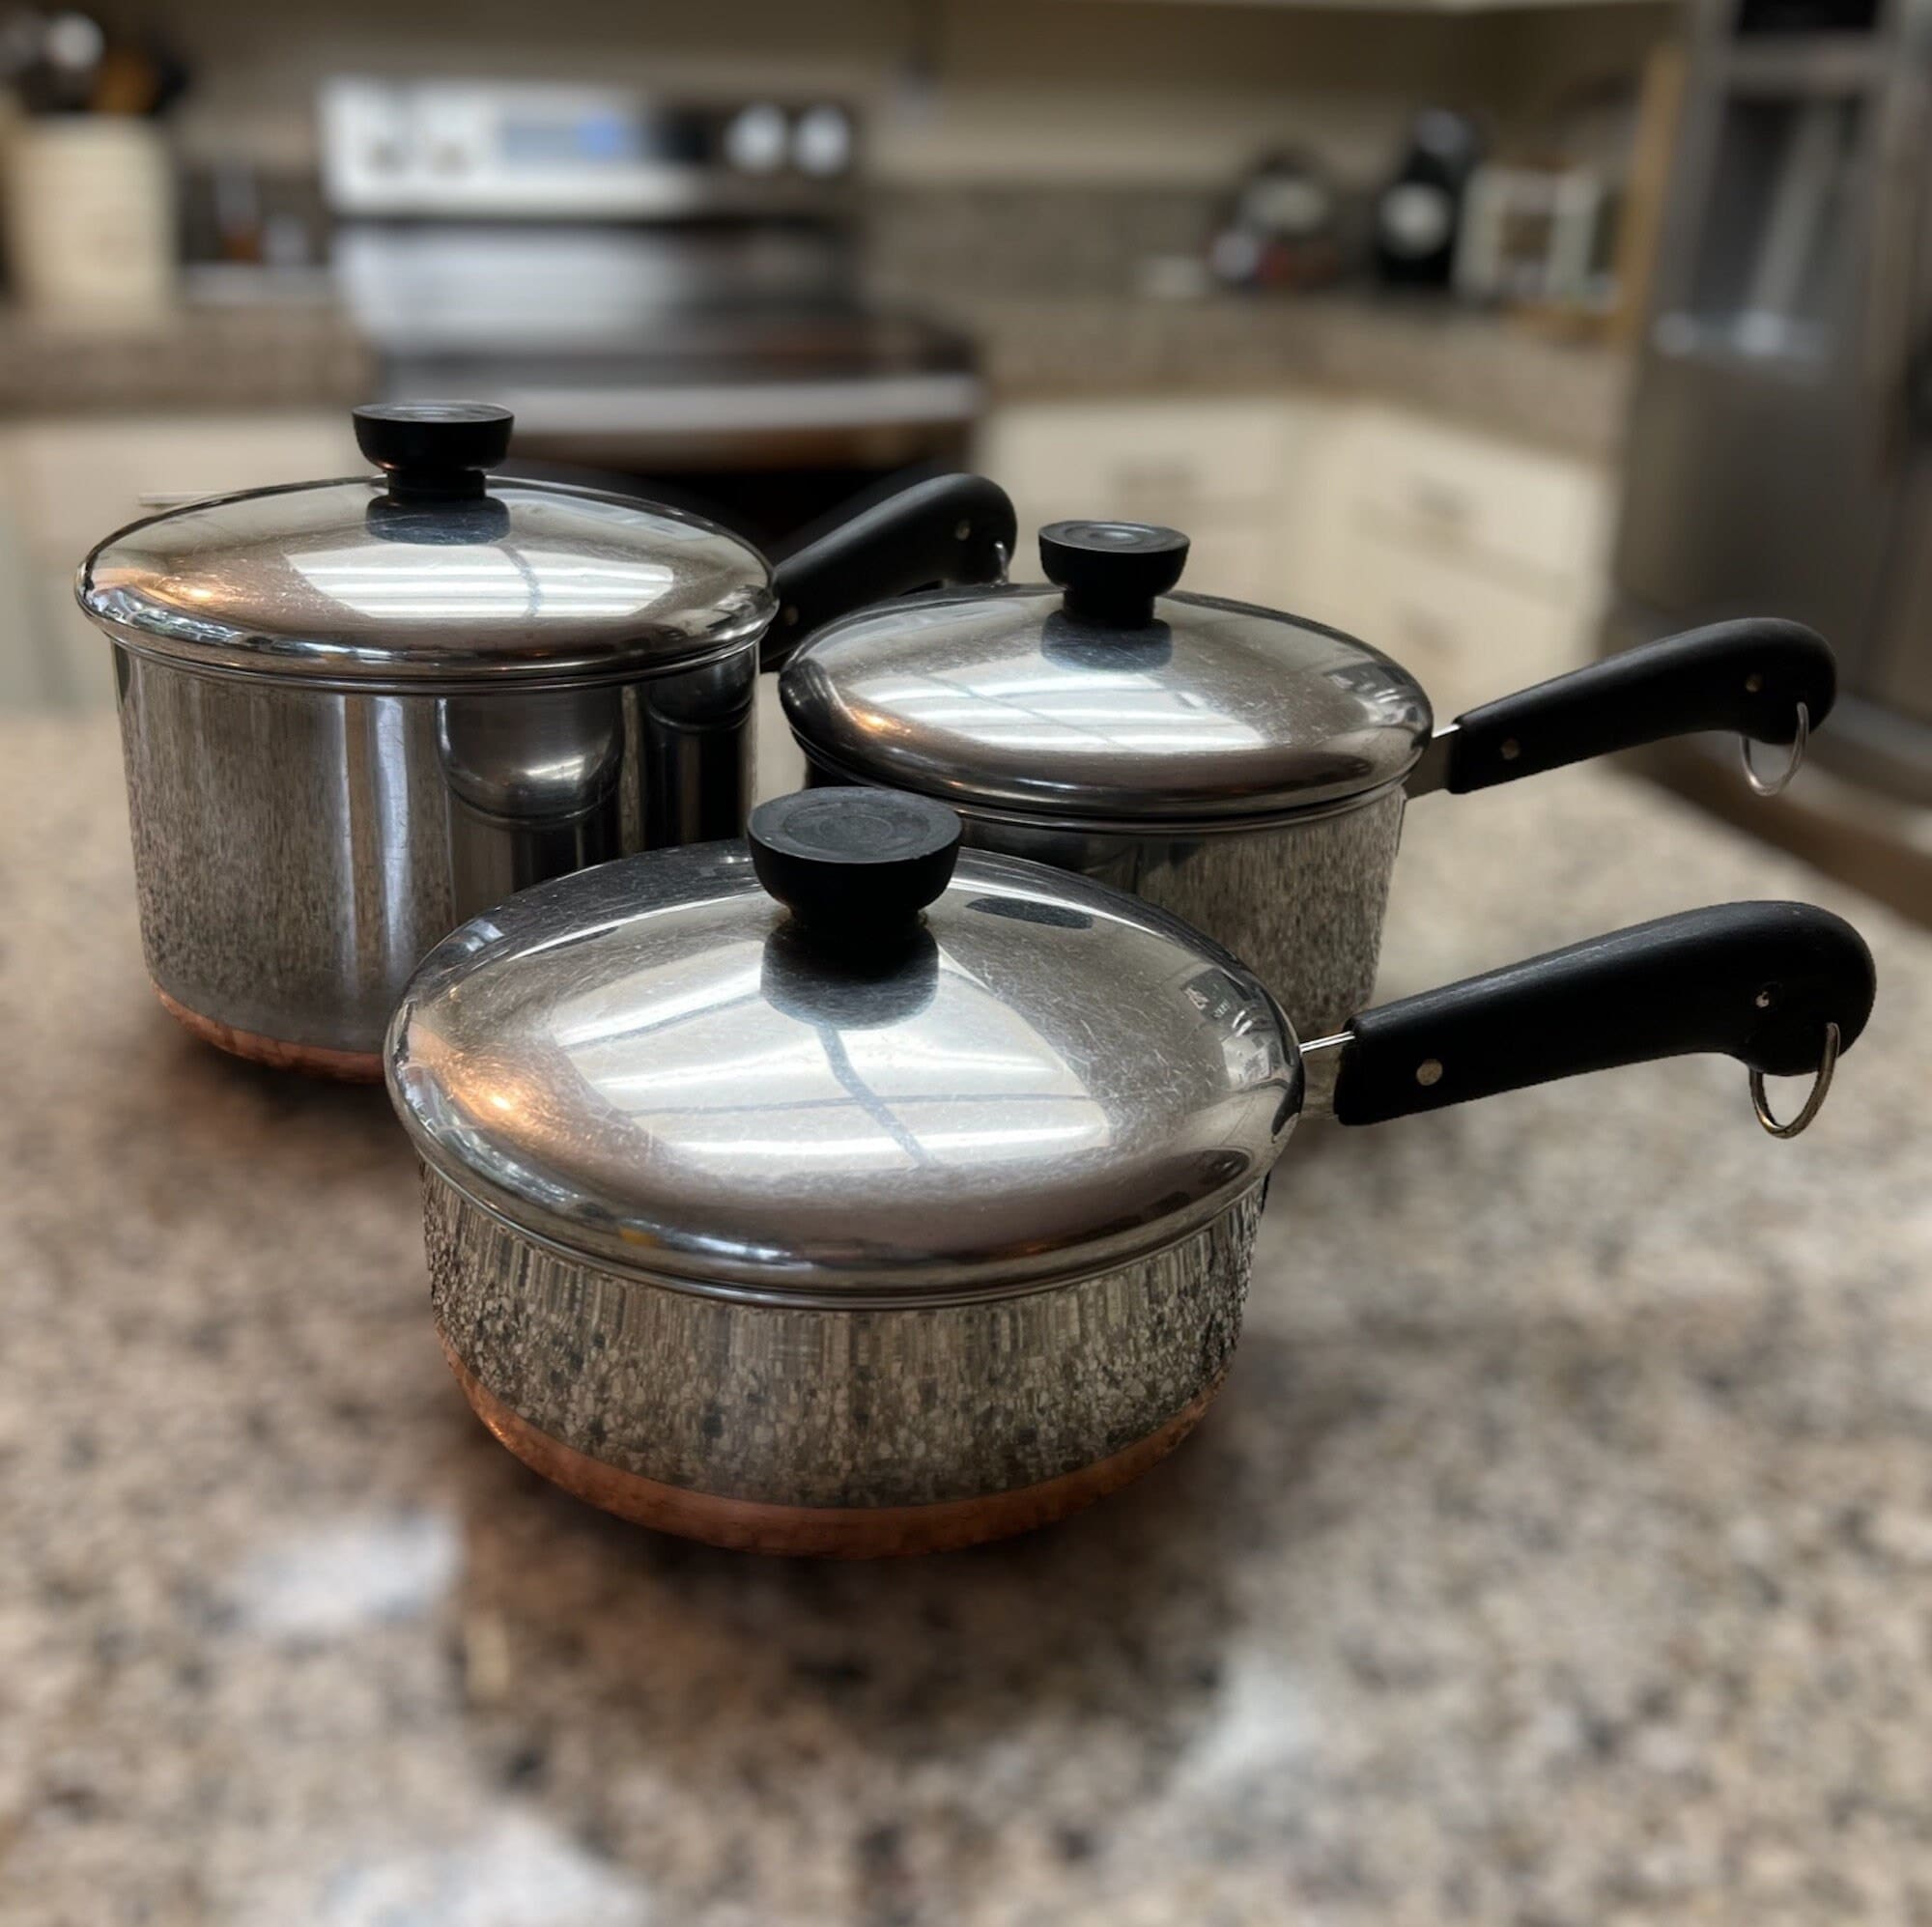 Buy Set of Four Vintage Revere Ware Copper Clad Cookware Online at